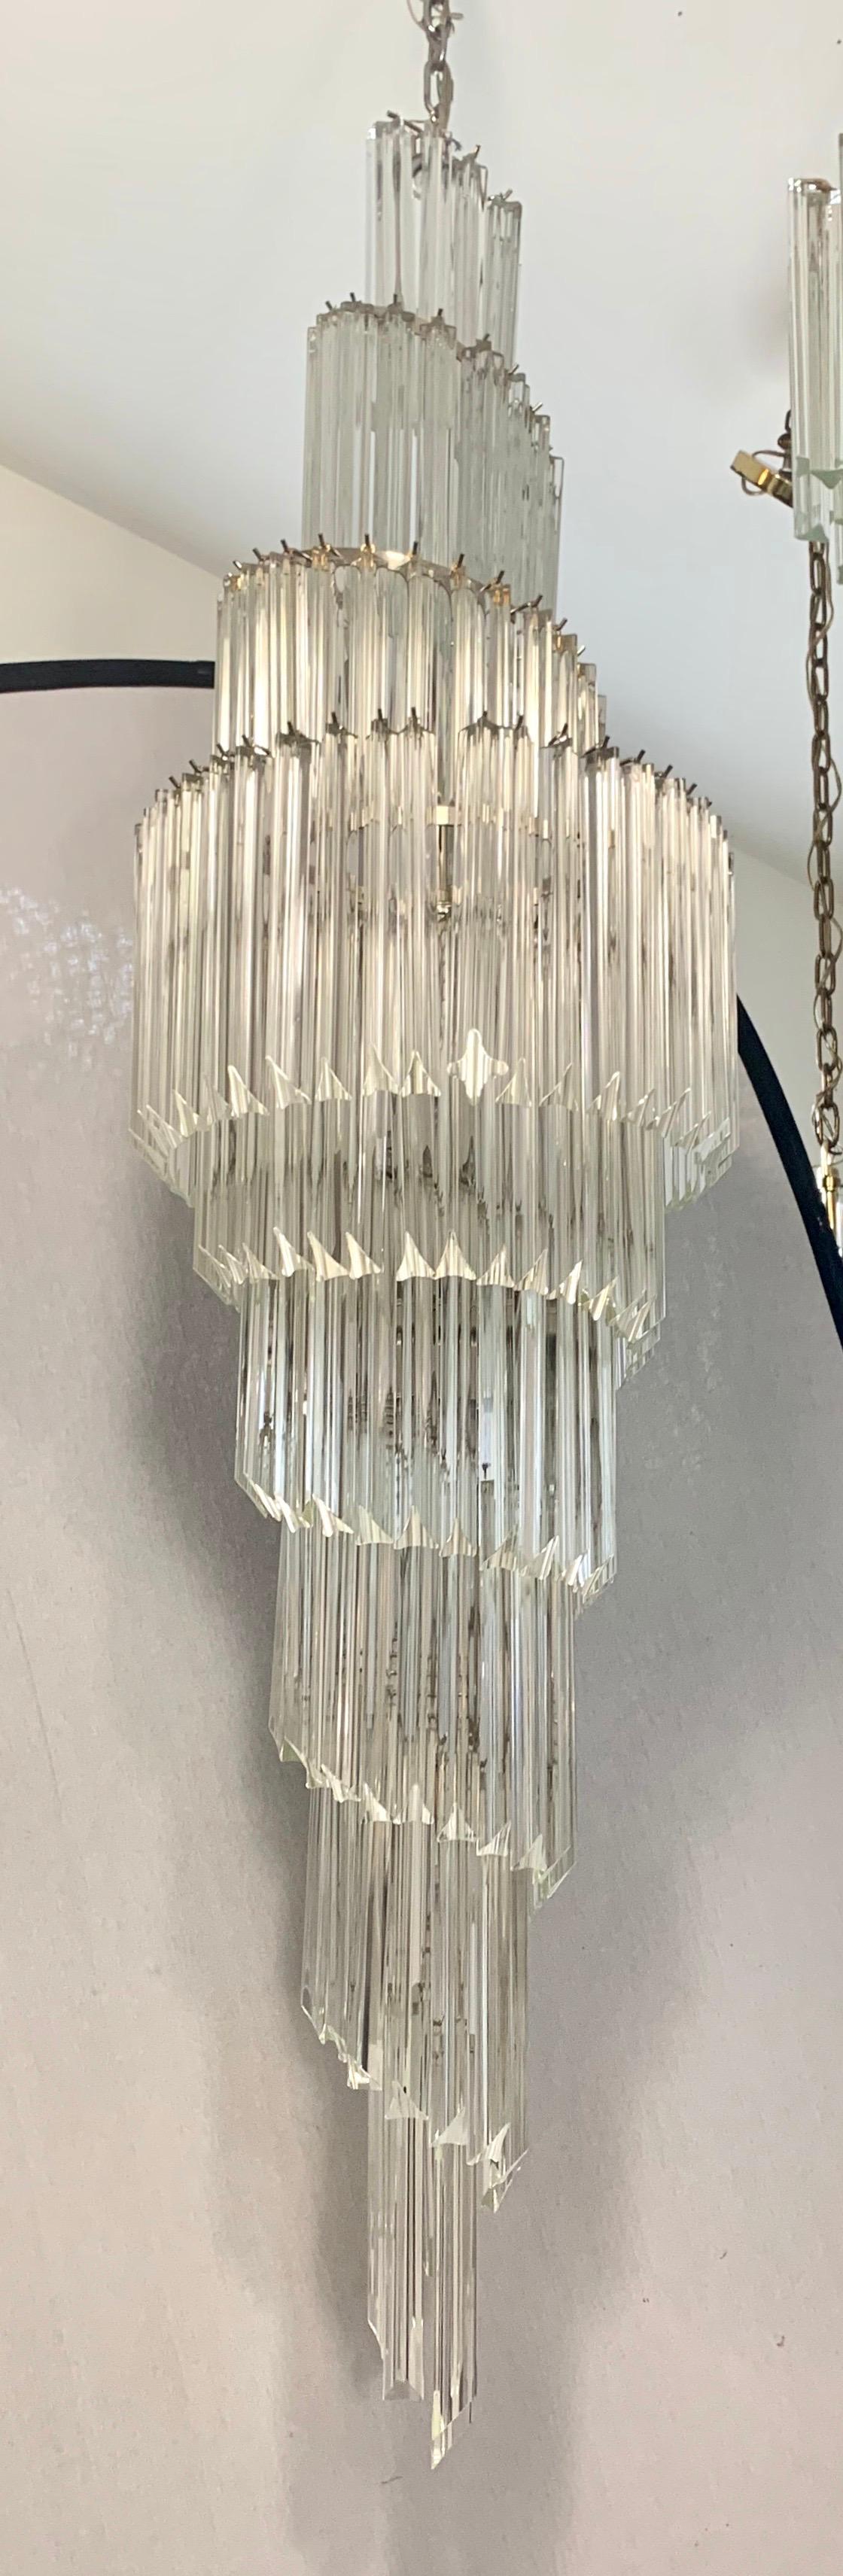 Measuring over six feet tall, this midcentury Camer glass foyer chandelier is guaranteed to make
a statement. Wired for USA and in perfect working order with multiple lights. Now, more than ever, home is where the heart is.